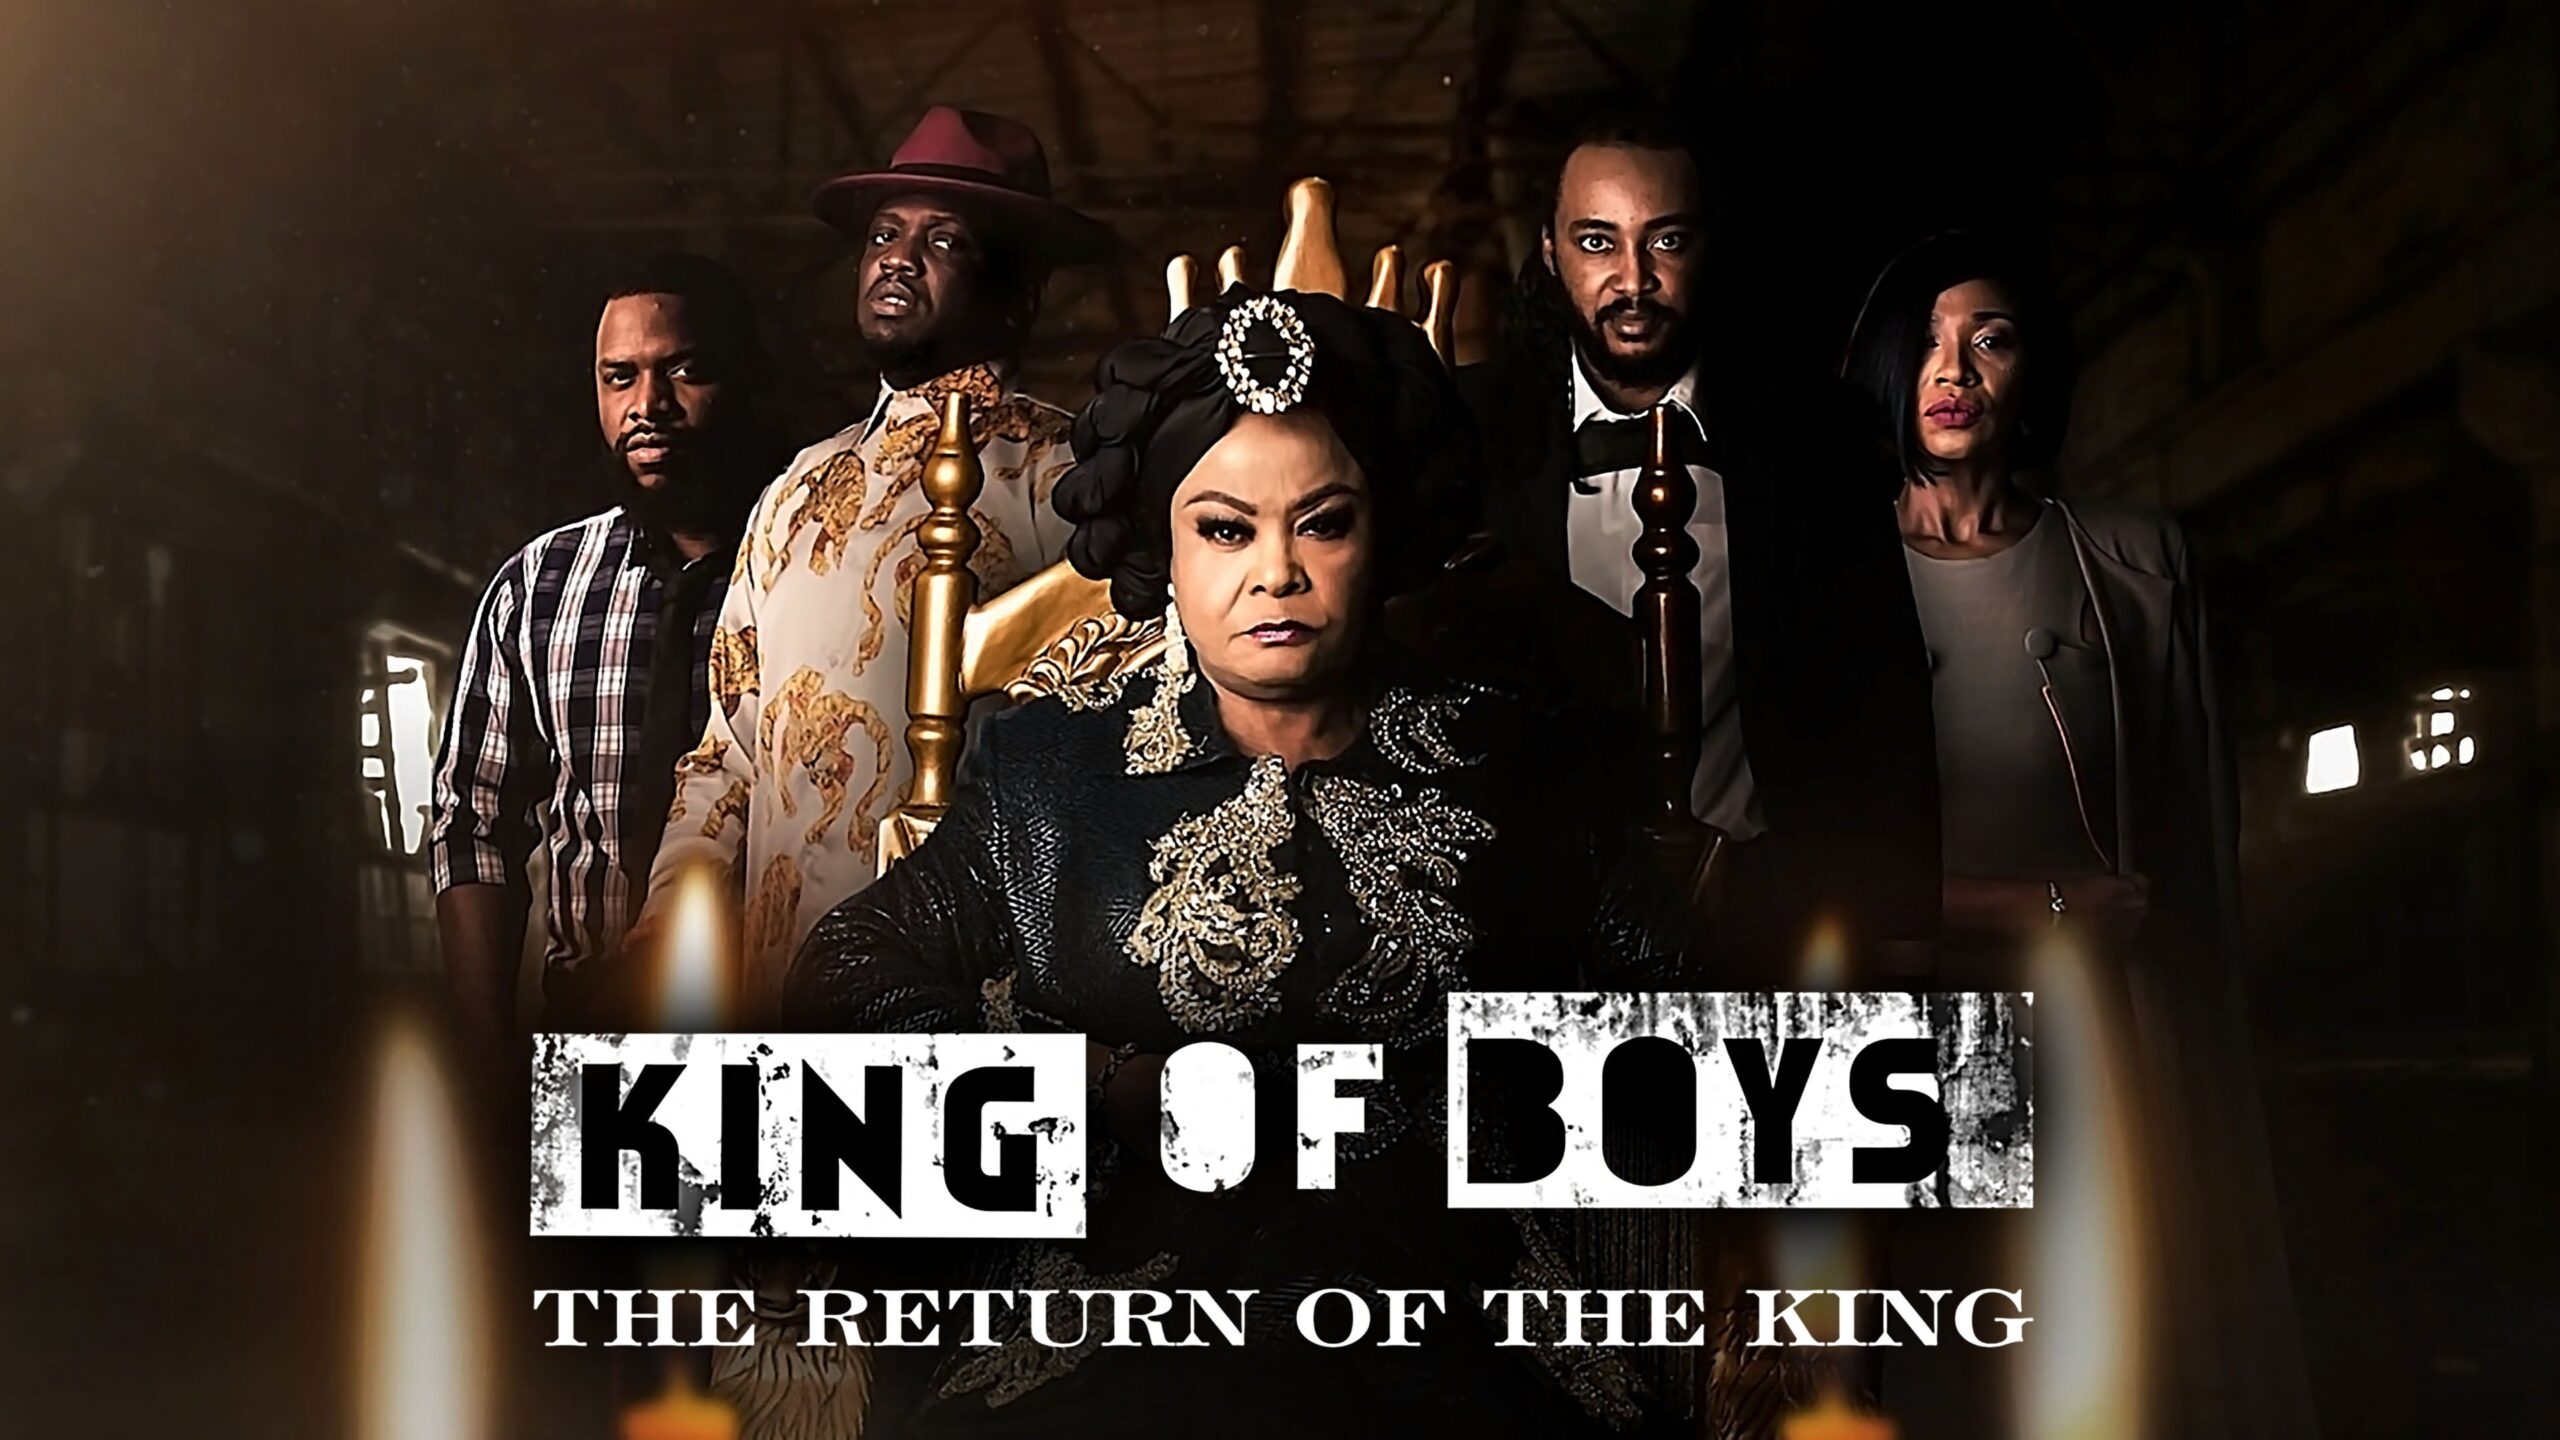 King of Boys: The return of the king